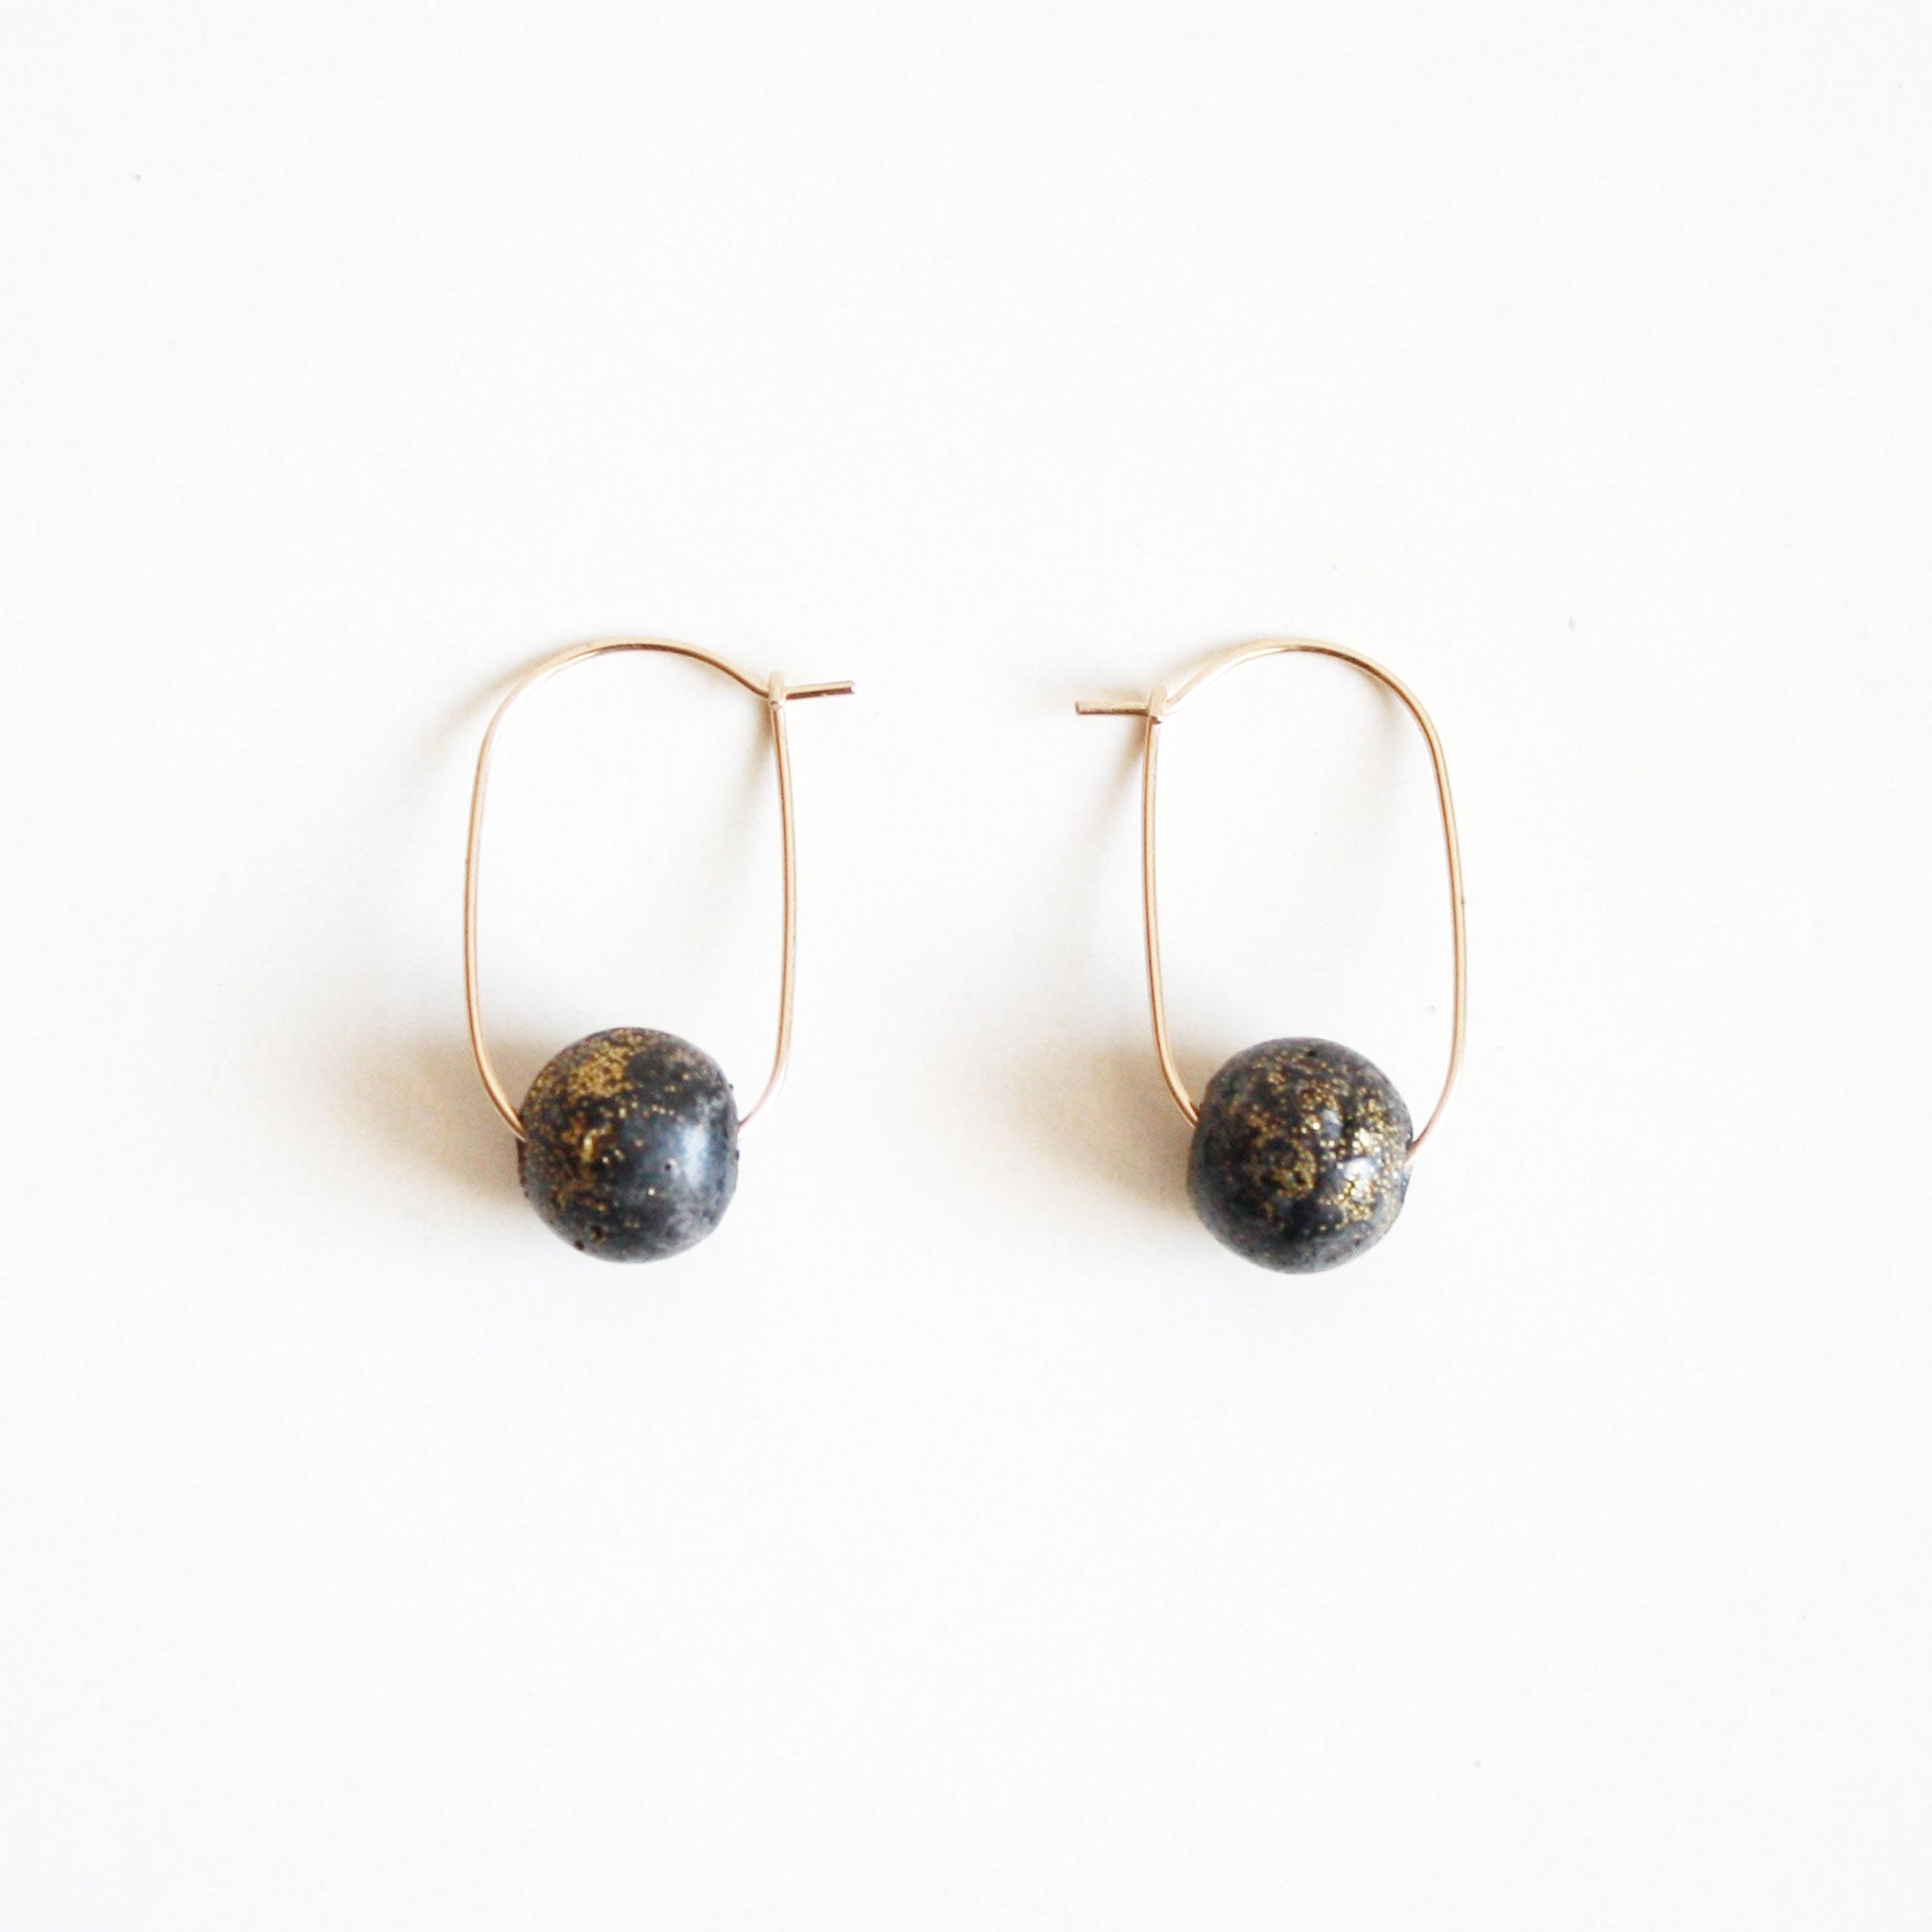 Oval Hoop Earrings with Small Black Balls – Hooks and Luxe